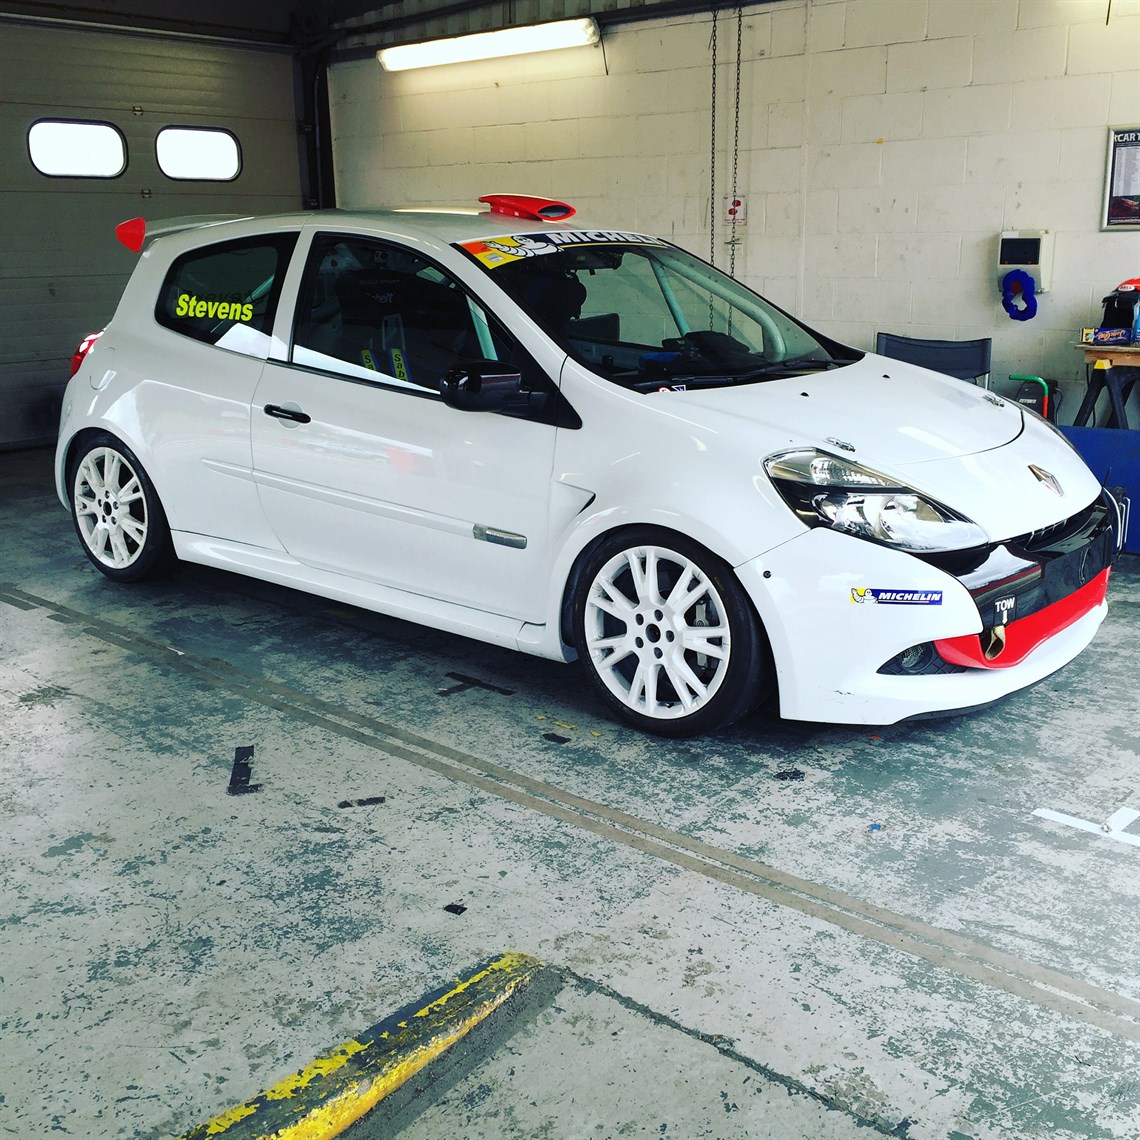 Racecarsdirect.com - Renault Clio Cup X85 race car